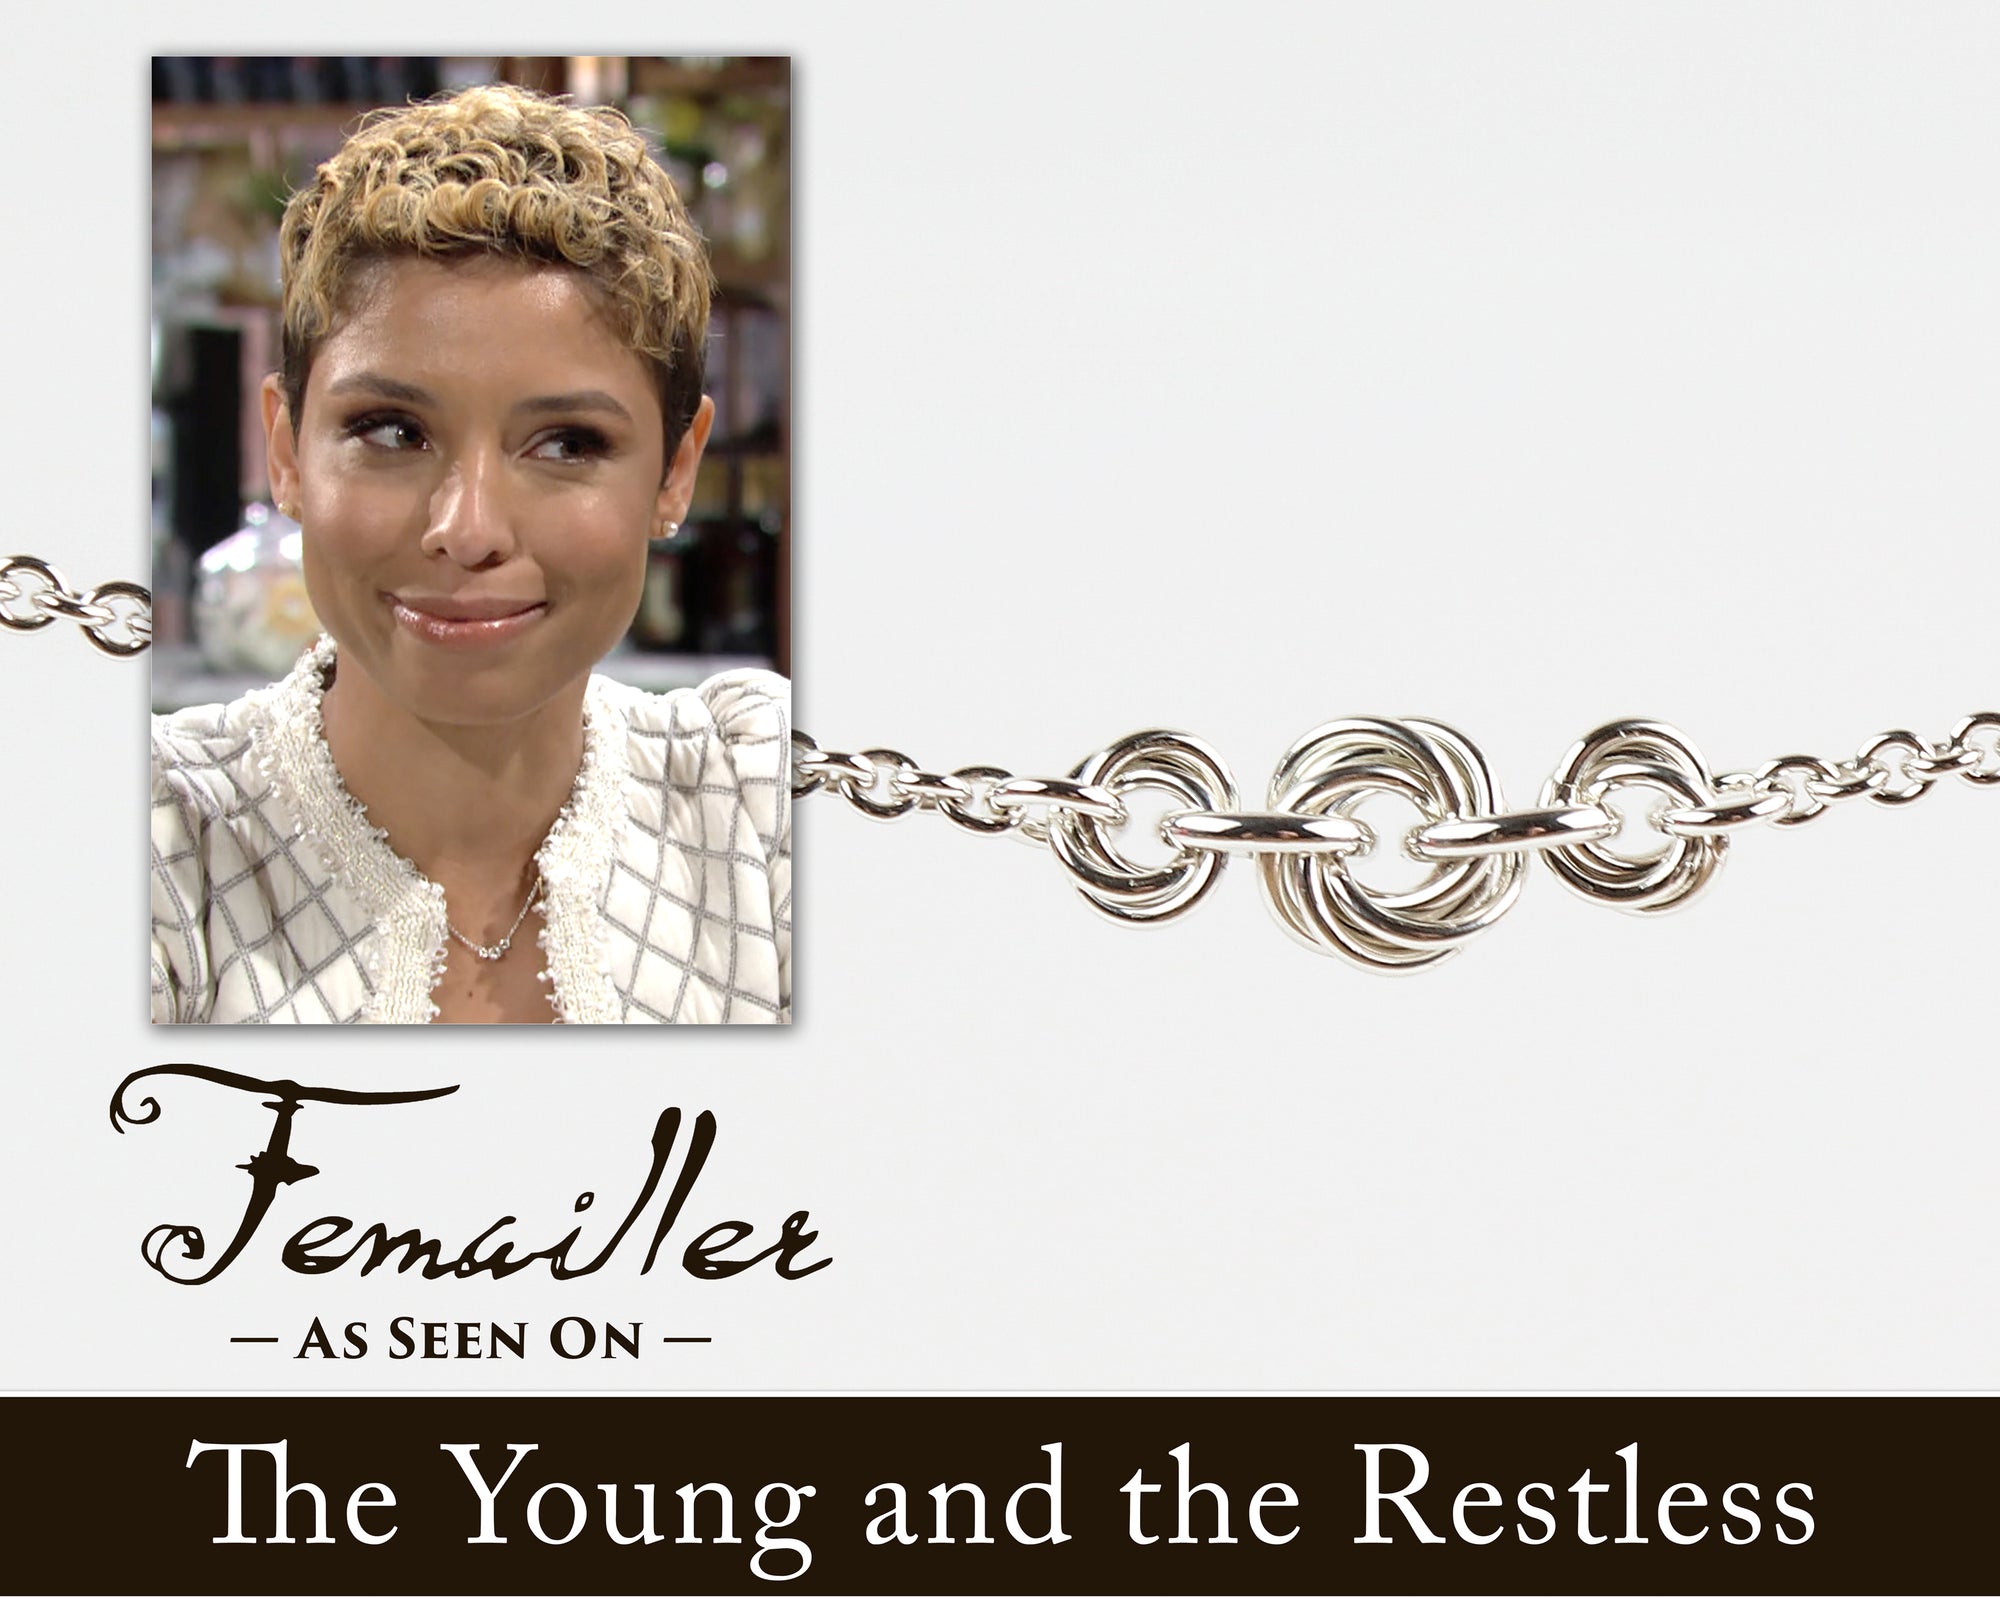 Femailler on The Young and the Restless (6th time!)